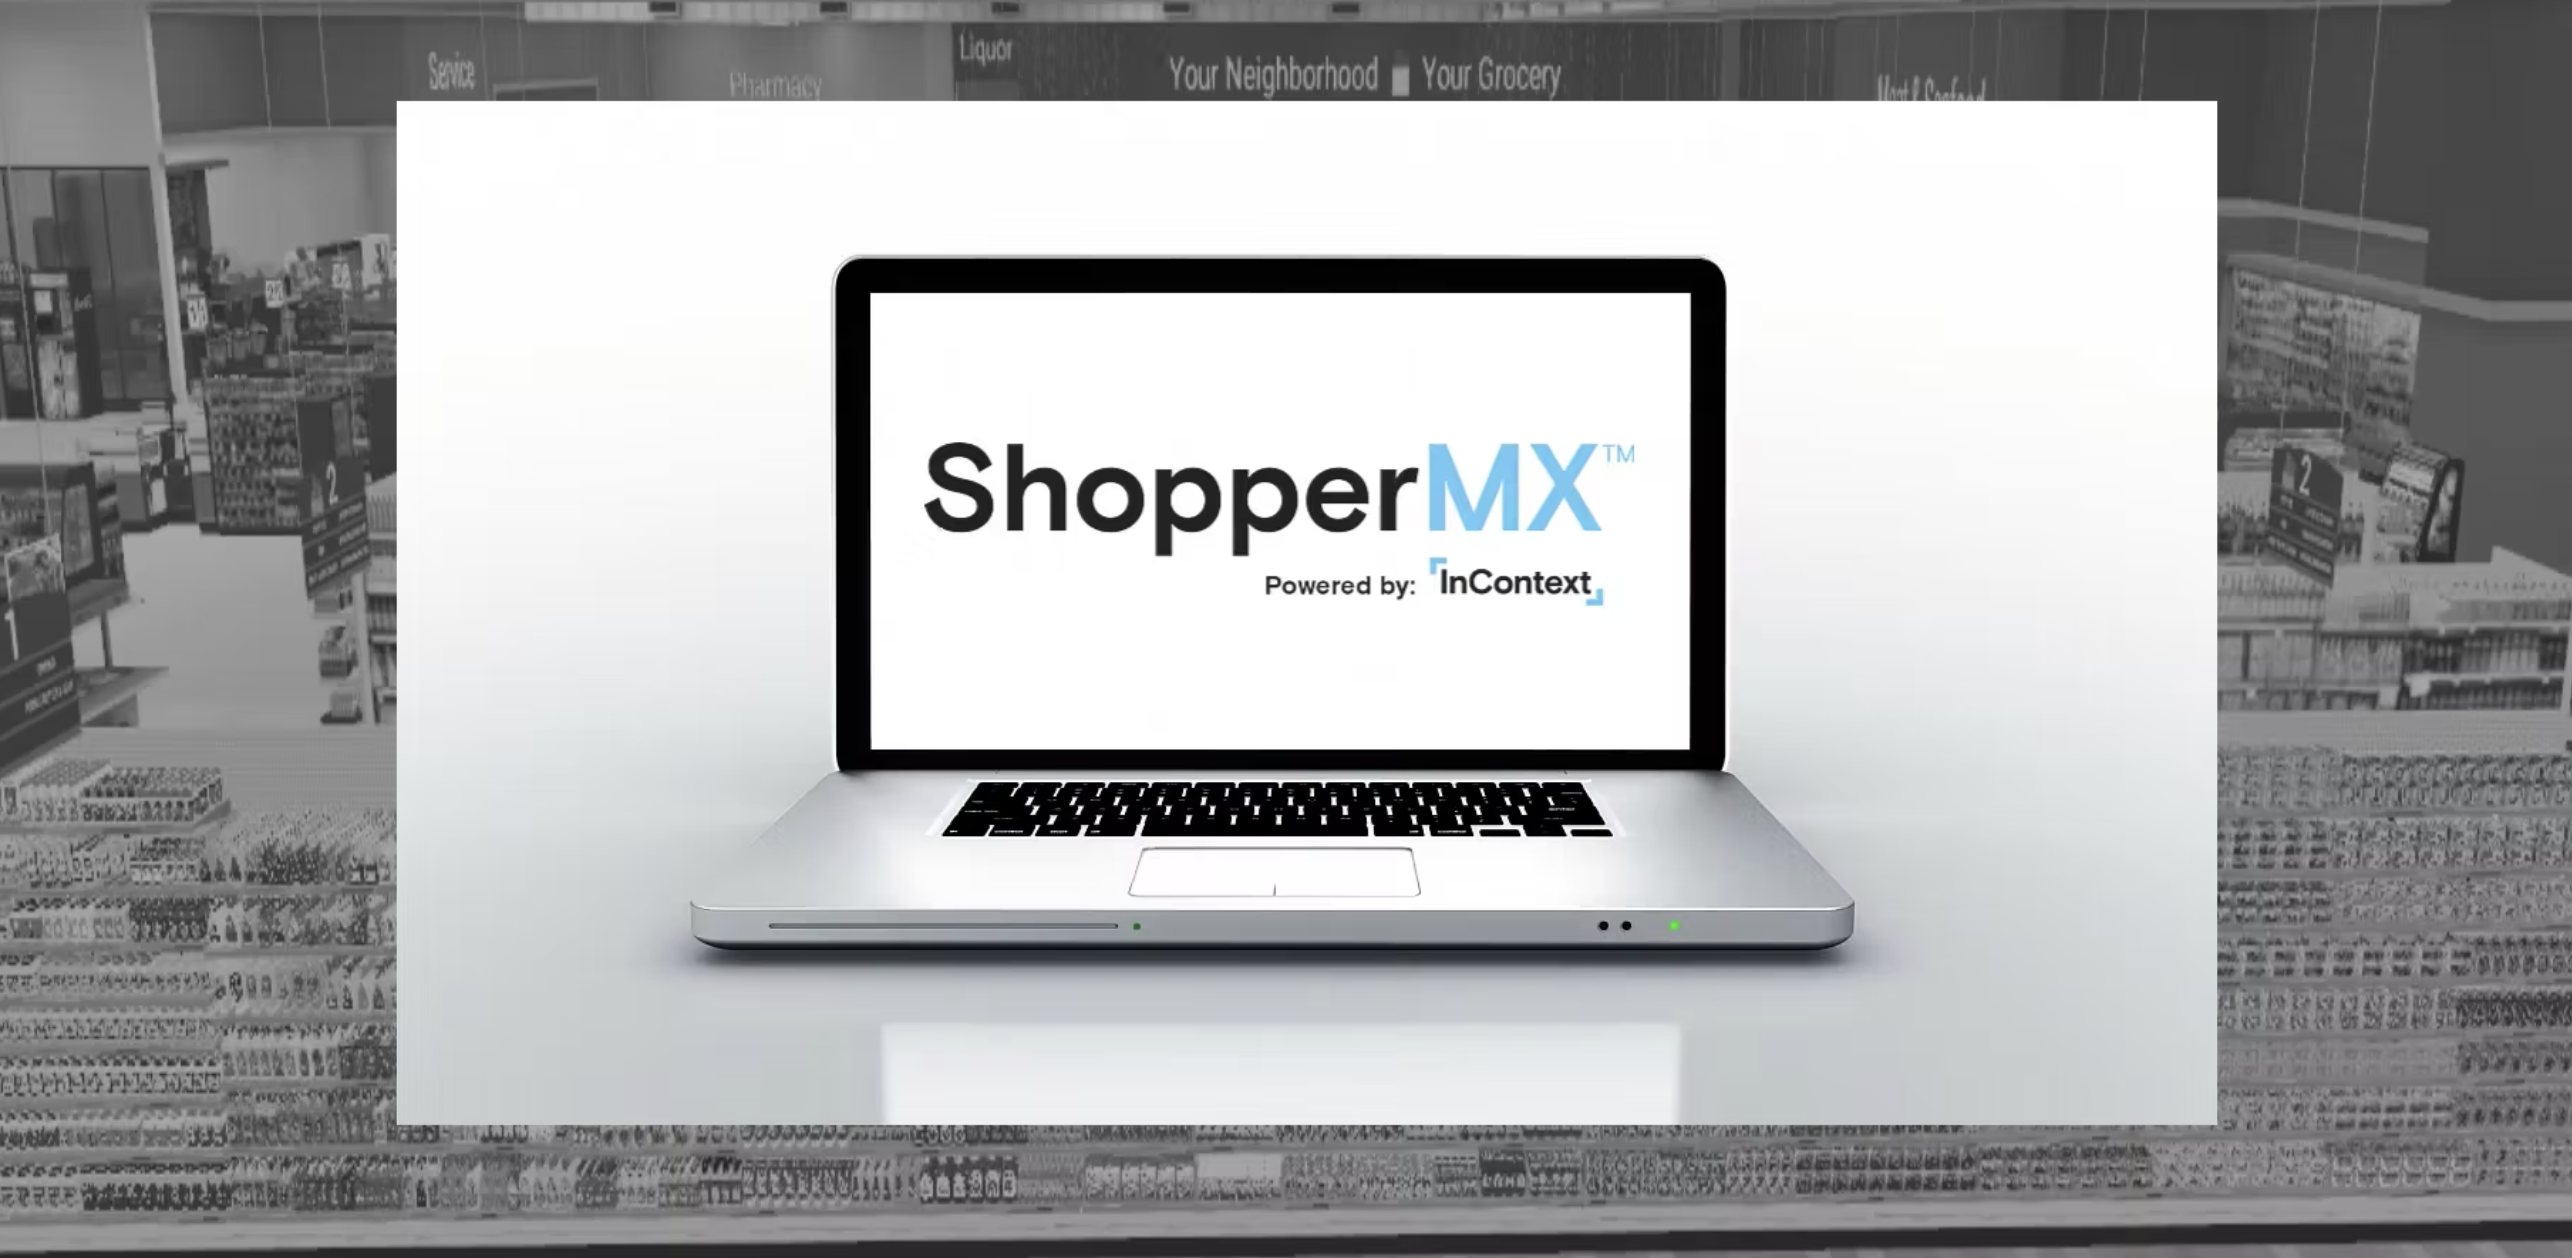 What Can You Do in ShopperMX?